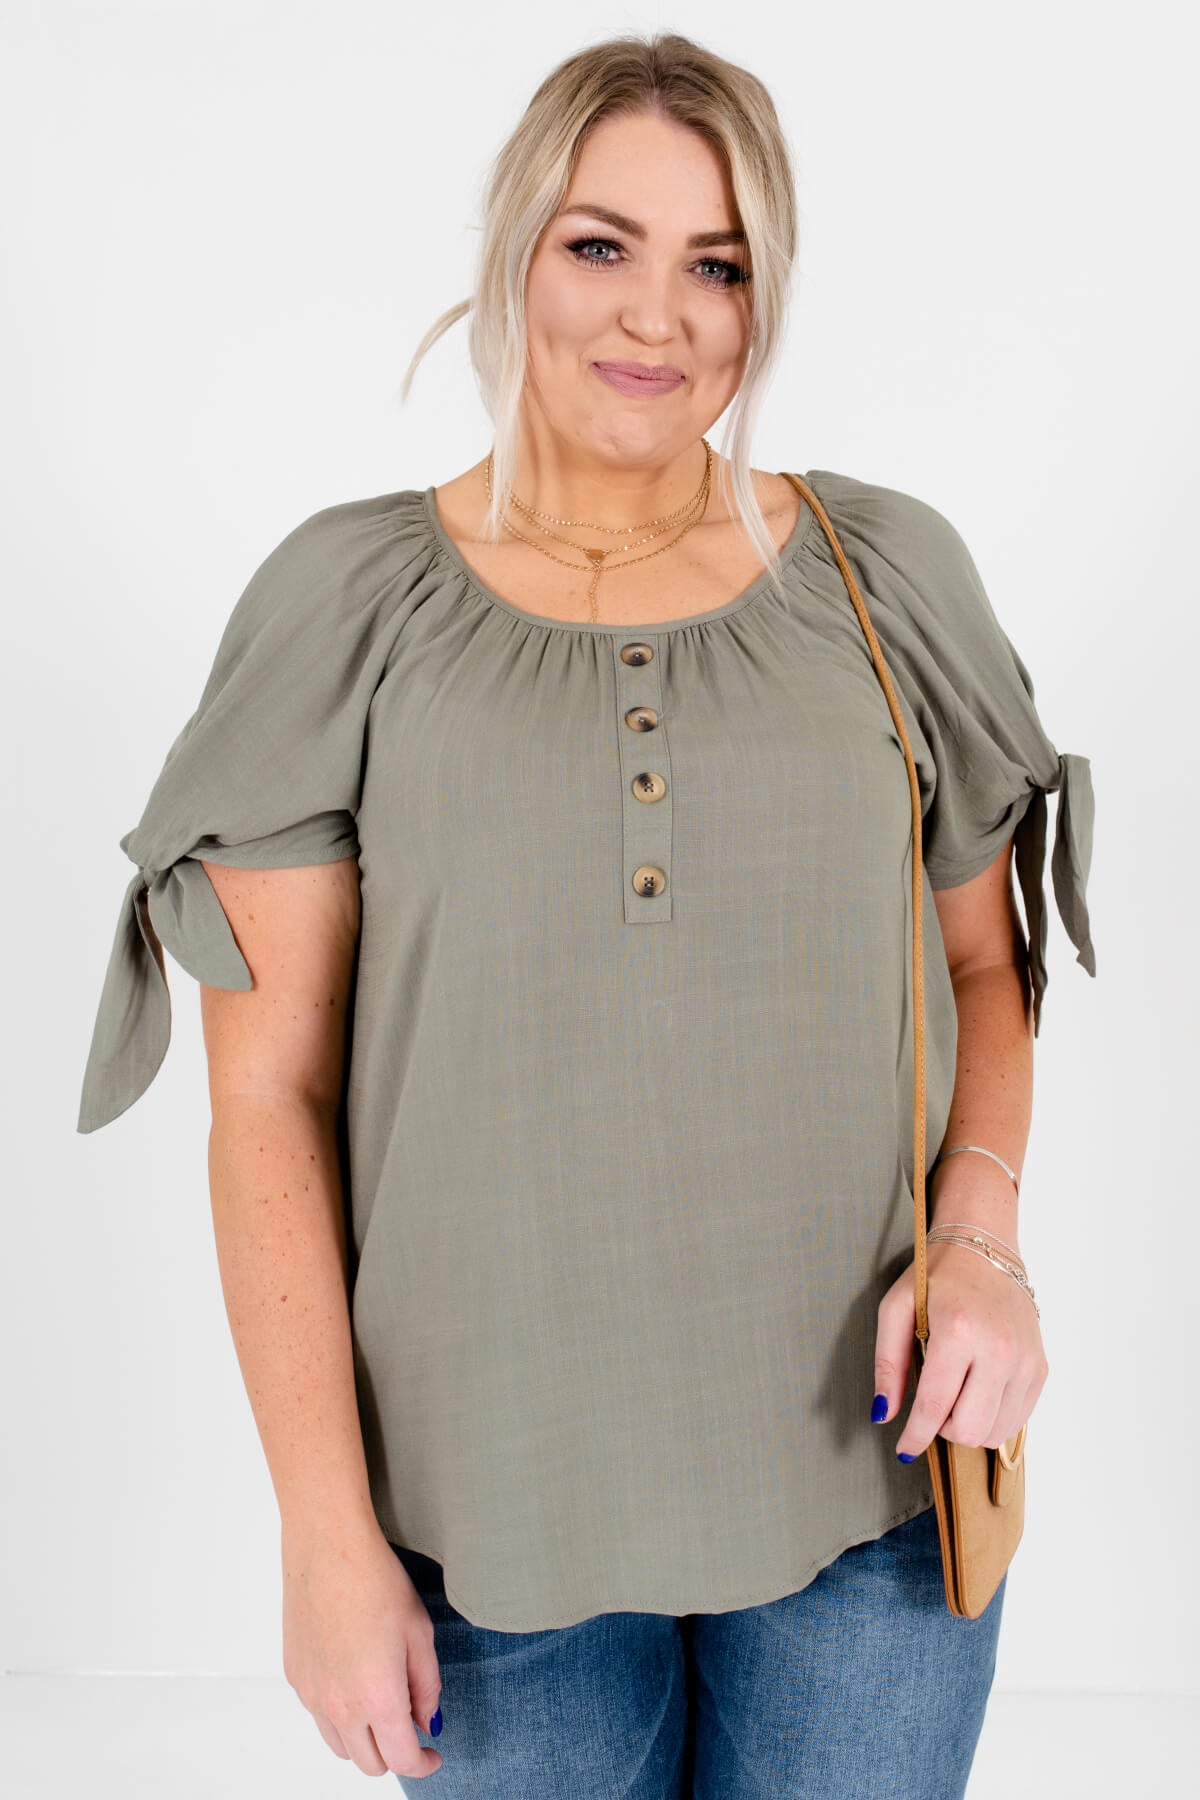 Women's Green High-Quality Boutique Plus Size Tops